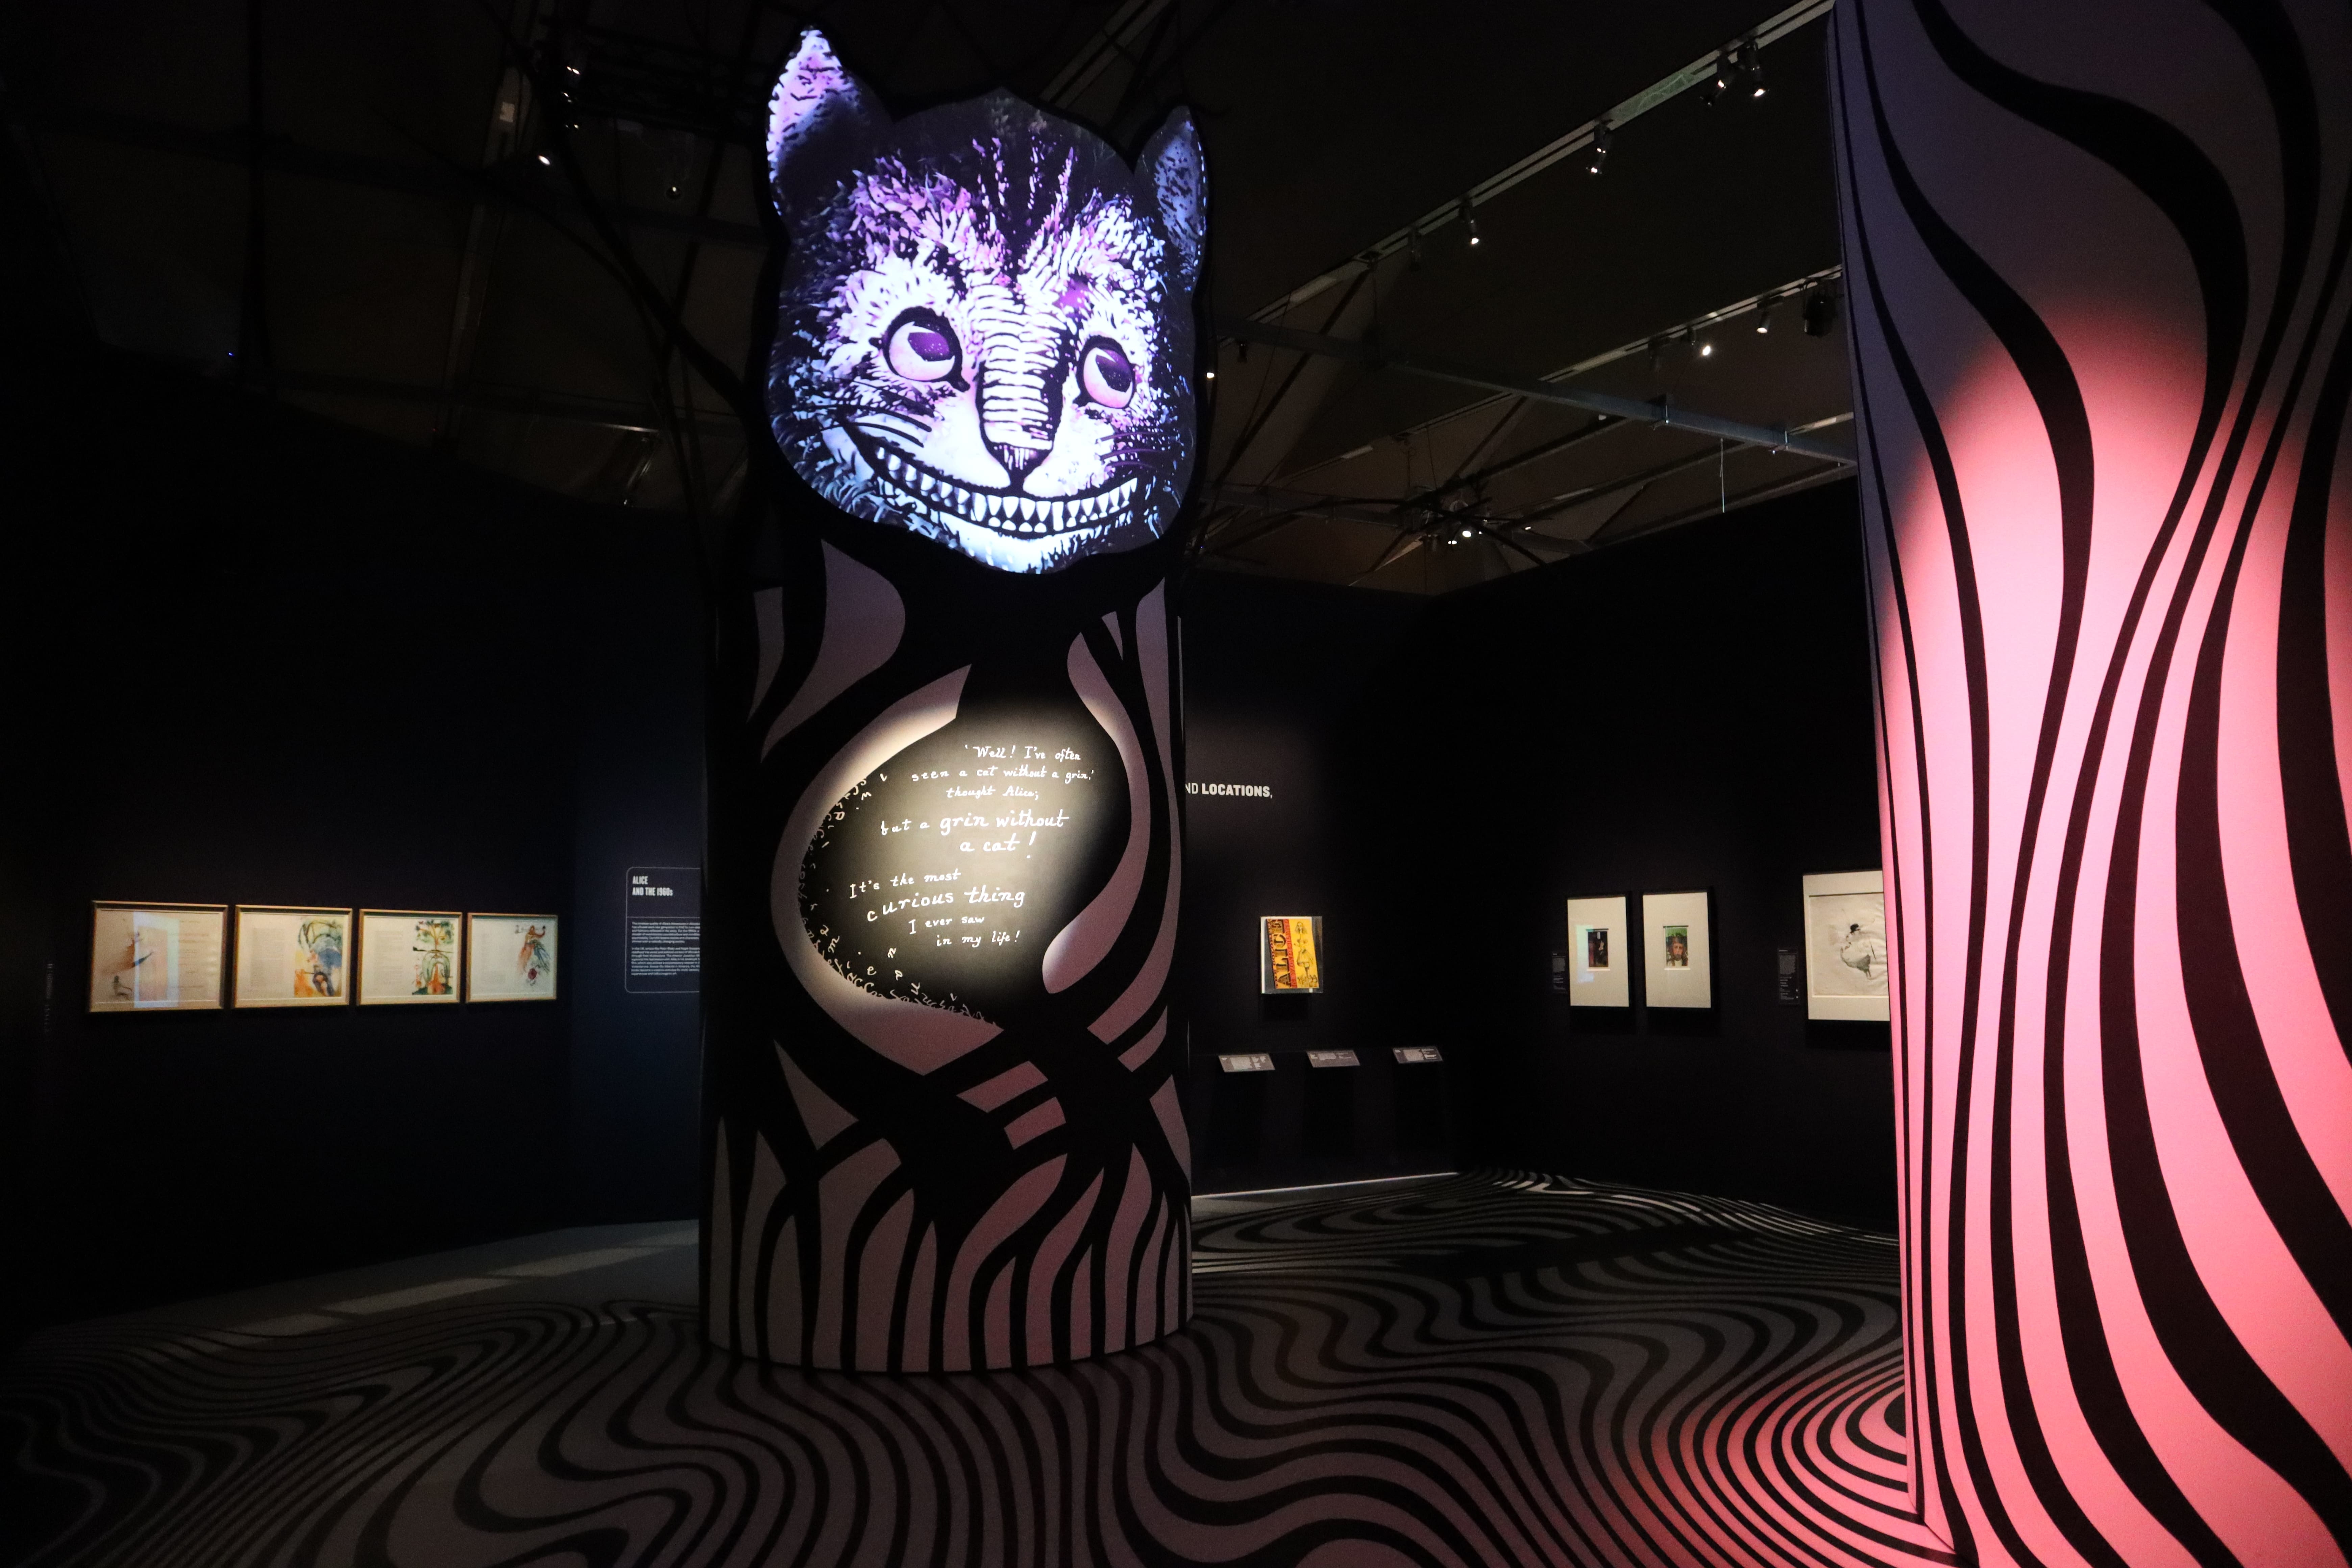 V＆Aでの展示の様子、チェシャー猫のインスタレーション Alice Curiouser and Curiouser, May 2021, Victoria and Albert Museum Installation Image, Cheshire Cat created by Victoria and Albert Museum, Alan Farlie, Tom Piper, Luke Halls Studio,Gareth Fry(c)Victoria and Albert Museum, London